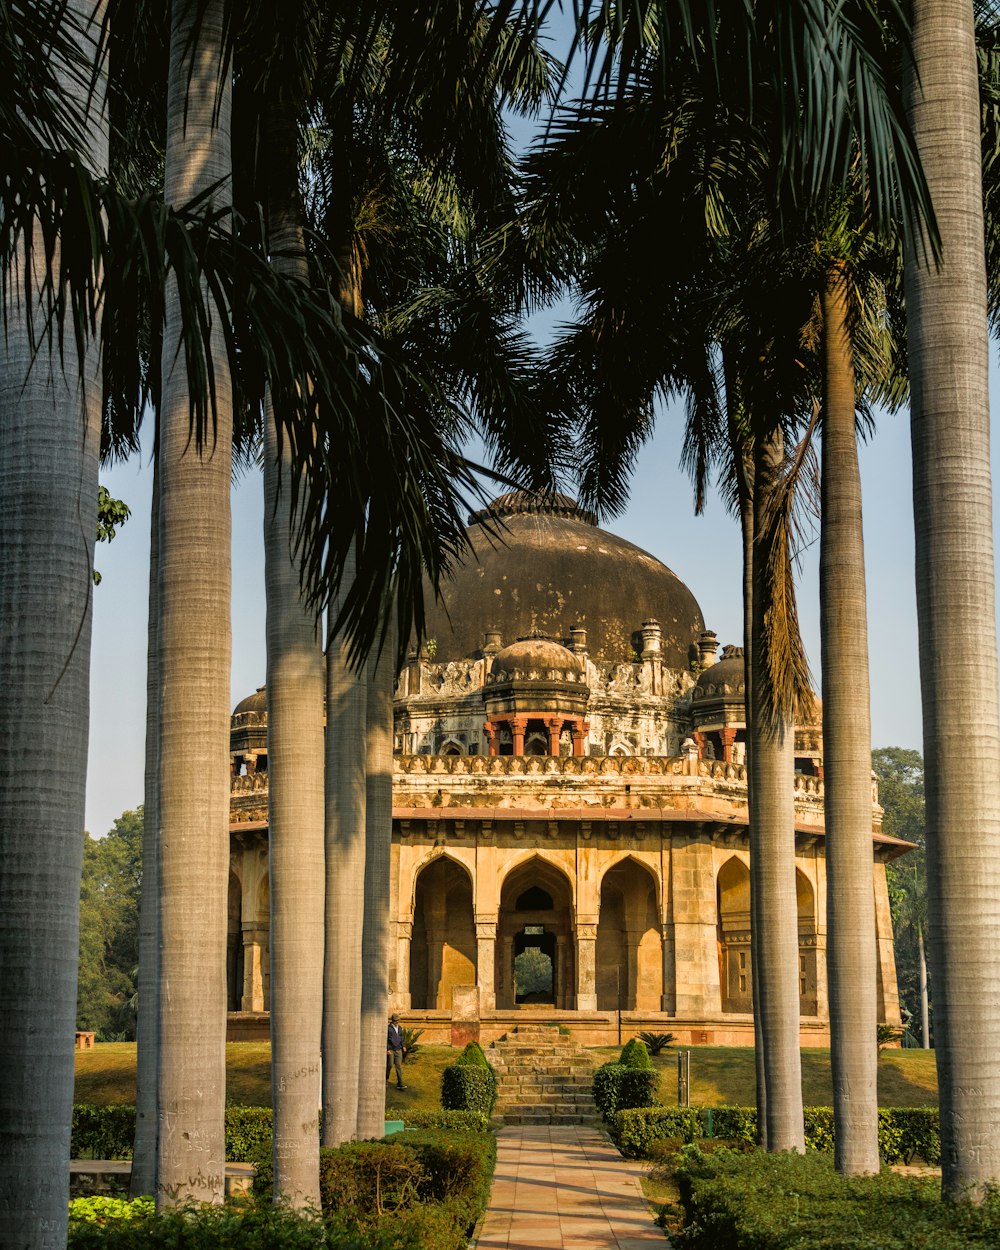 a building with a dome surrounded by palm trees